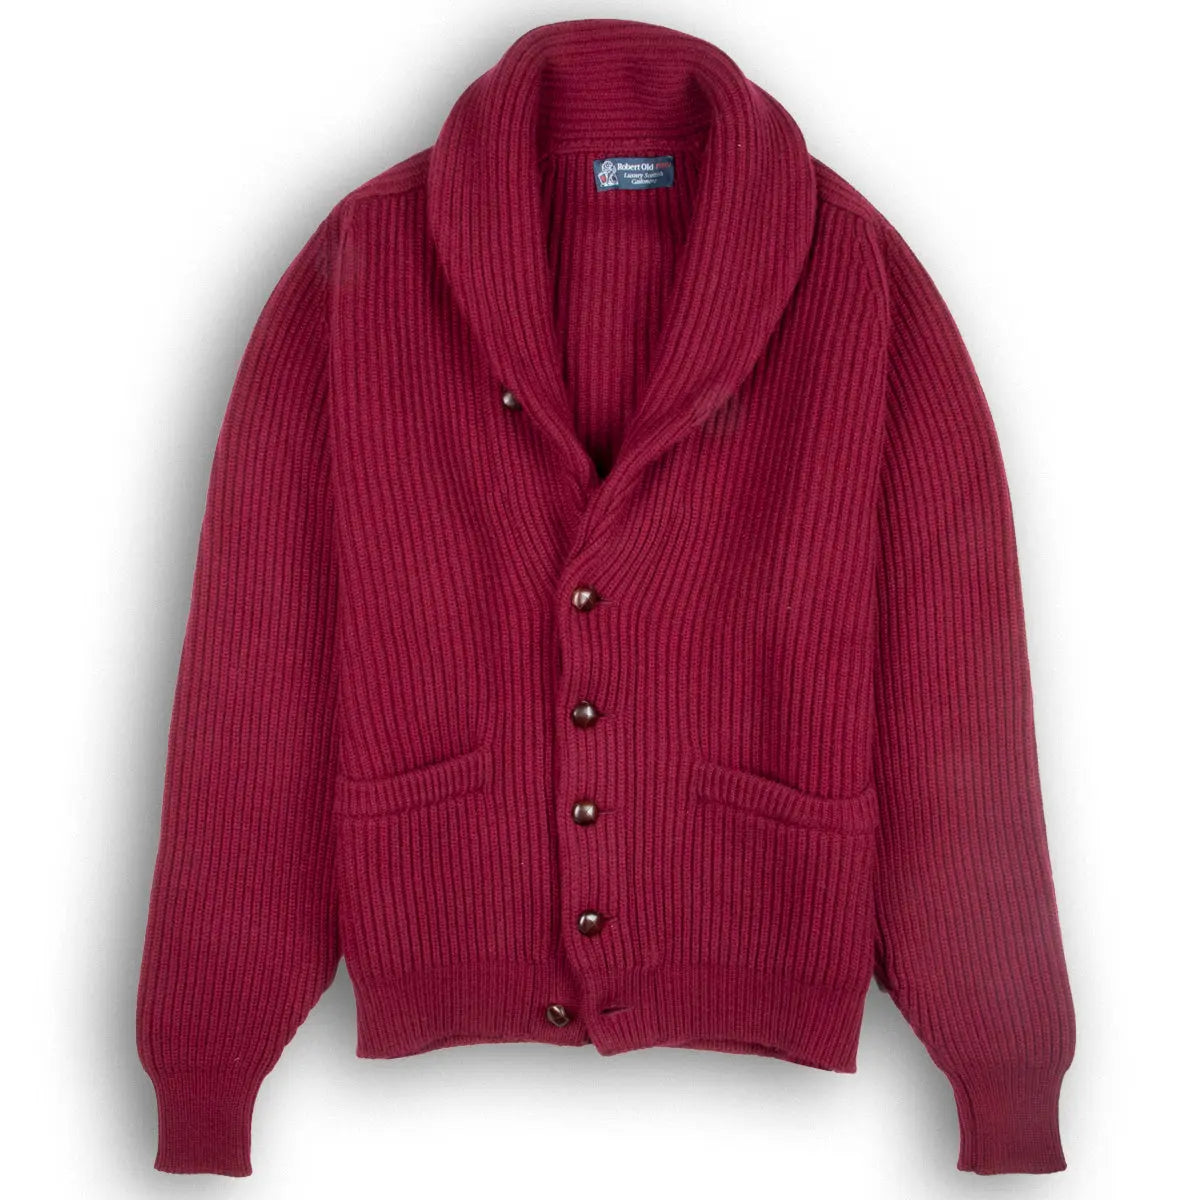 Claret Red Colonial 8ply Cashmere Shawl Cardigan  Robert Old   